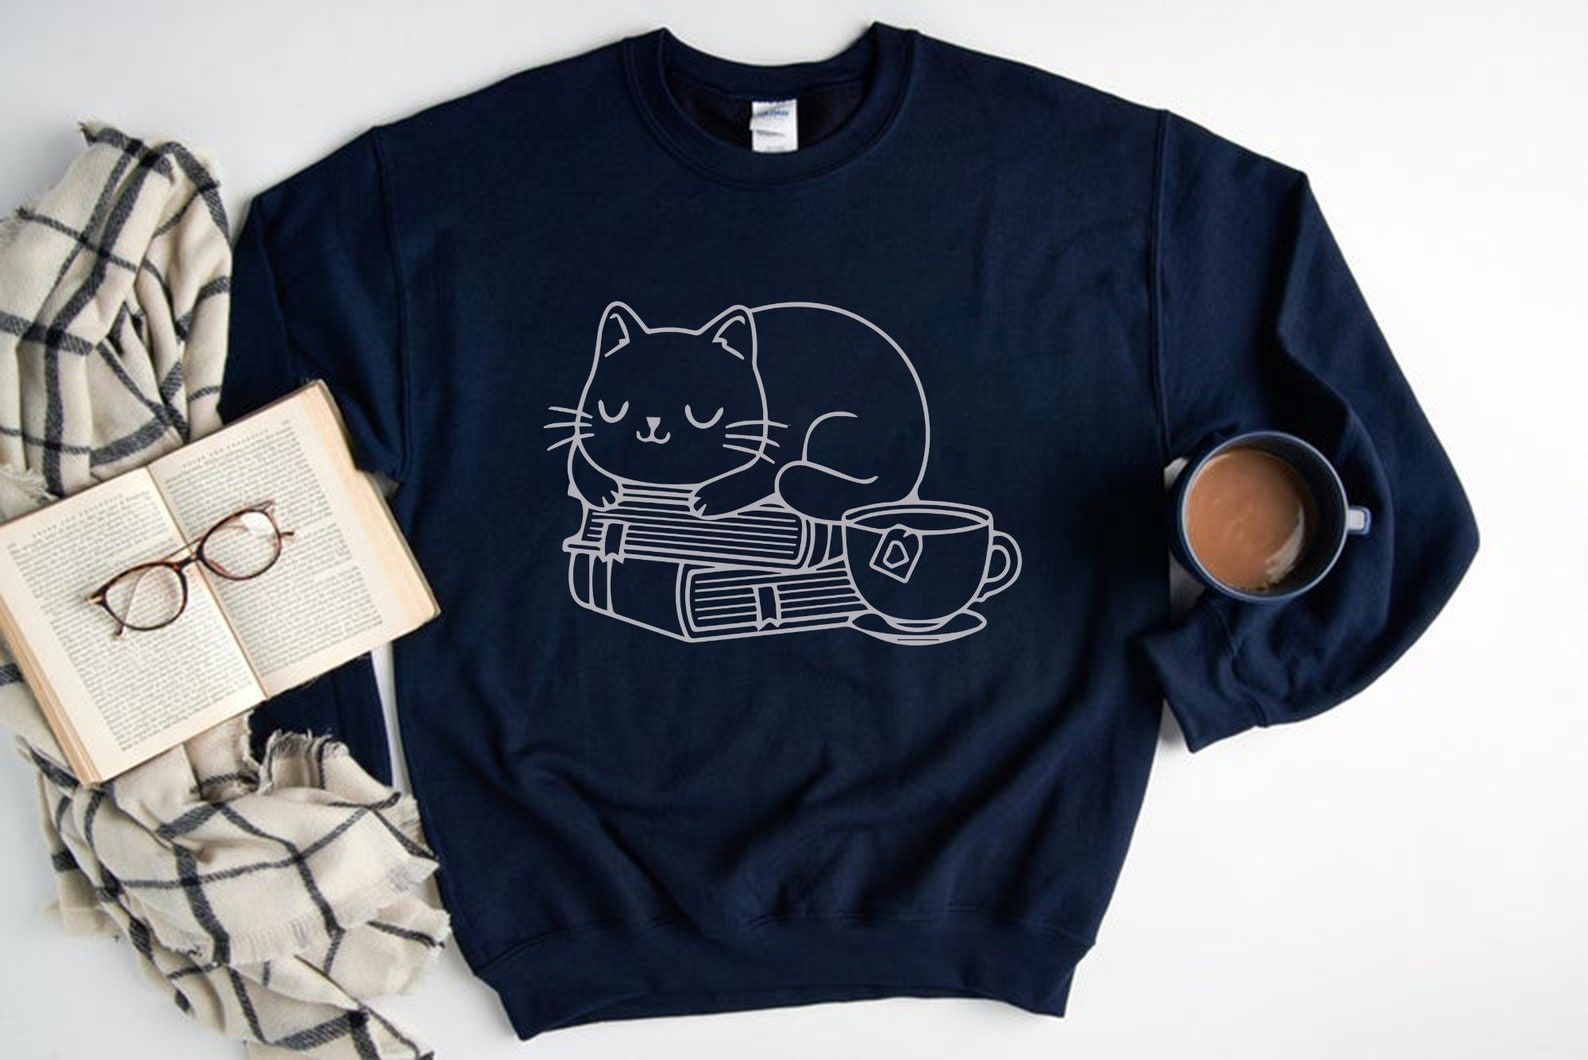 Blue sweatshirt with a white outline of a cat, cup of tea, and a stack of books. It is beneath an open book that has glasses on top, as well as with a mug of coffee under the sleeve's seam. 